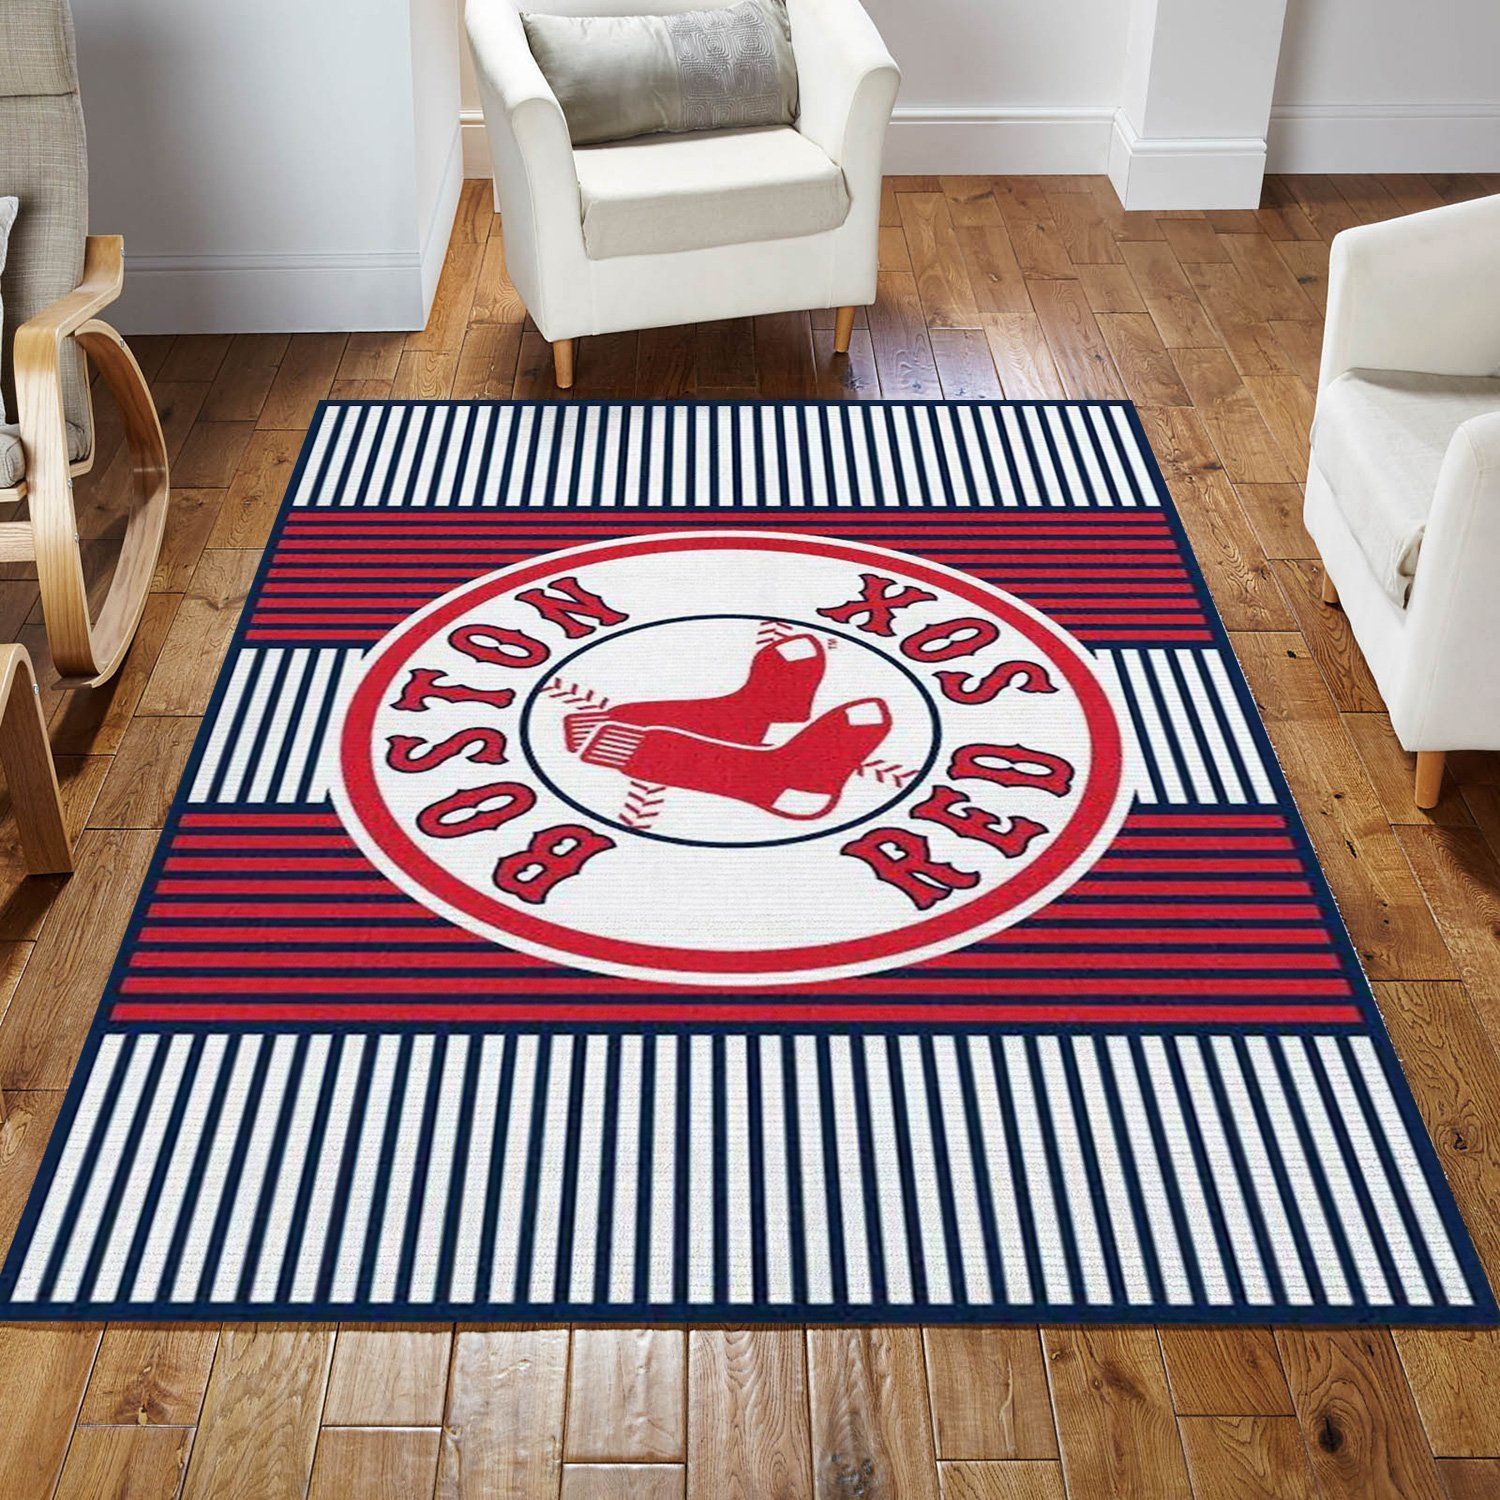 Boston Red Sox Imperial Champion Rug Area Rug For Christmas, Living room and bedroom Rug, Family Gift US Decor - Indoor Outdoor Rugs 3